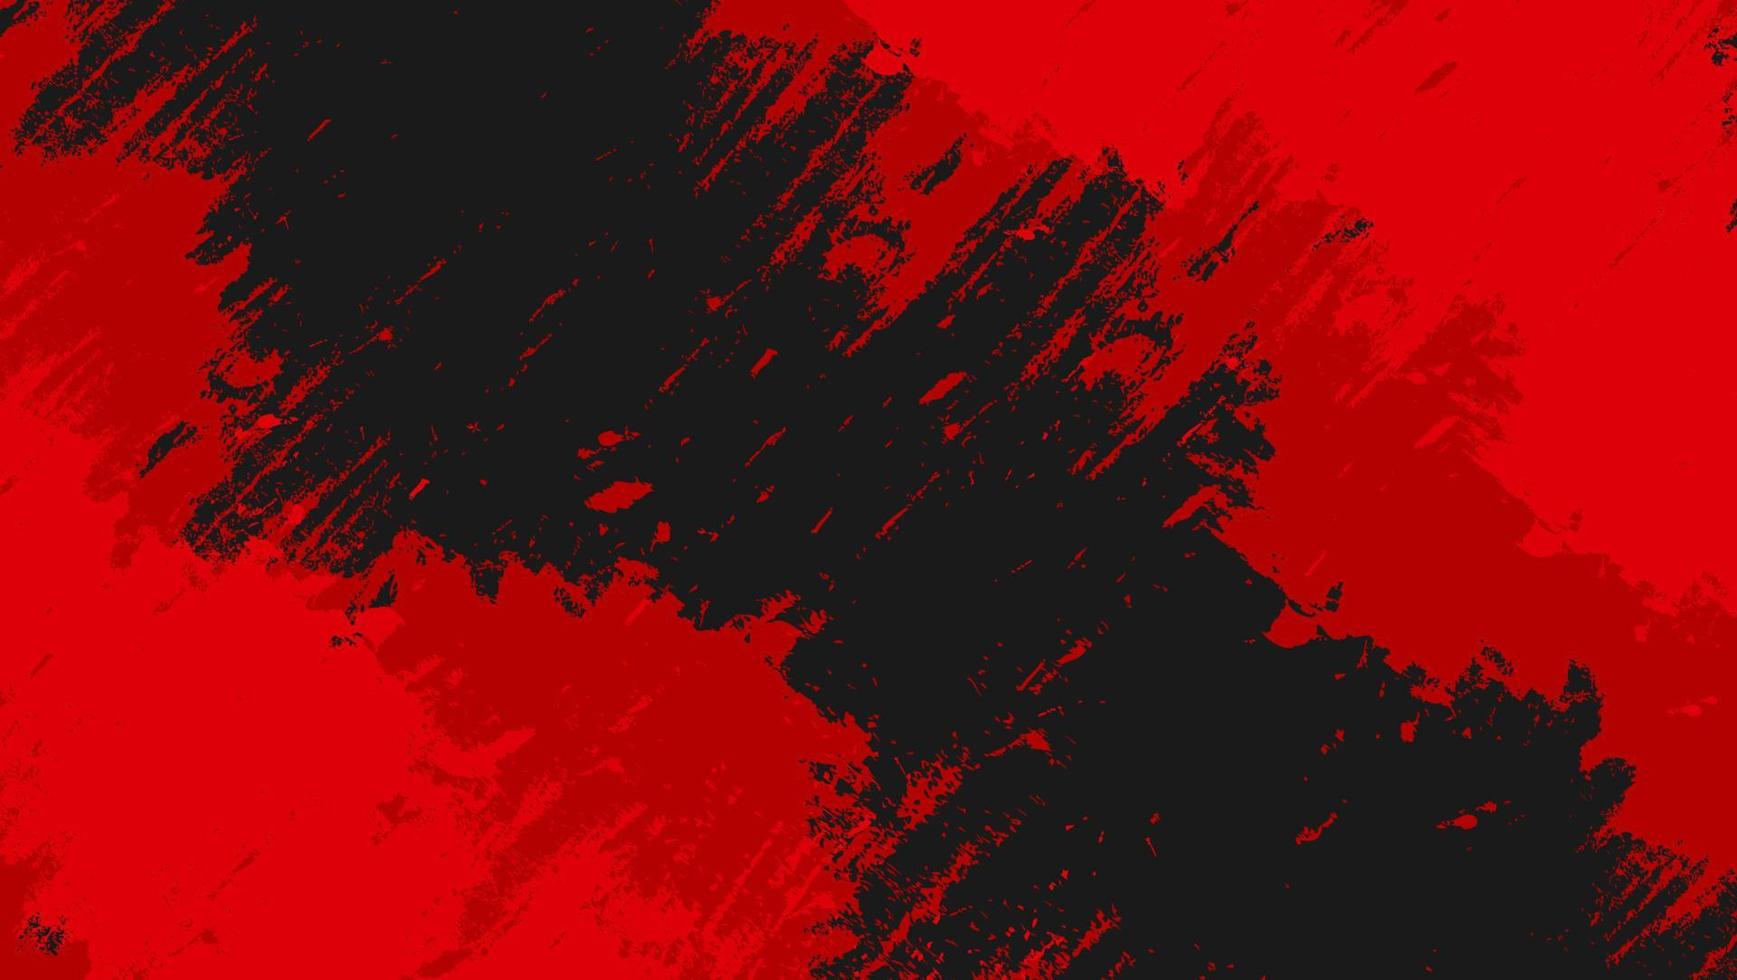 Abstract Bright Red Scratch Grunge Texture In Black Background vector